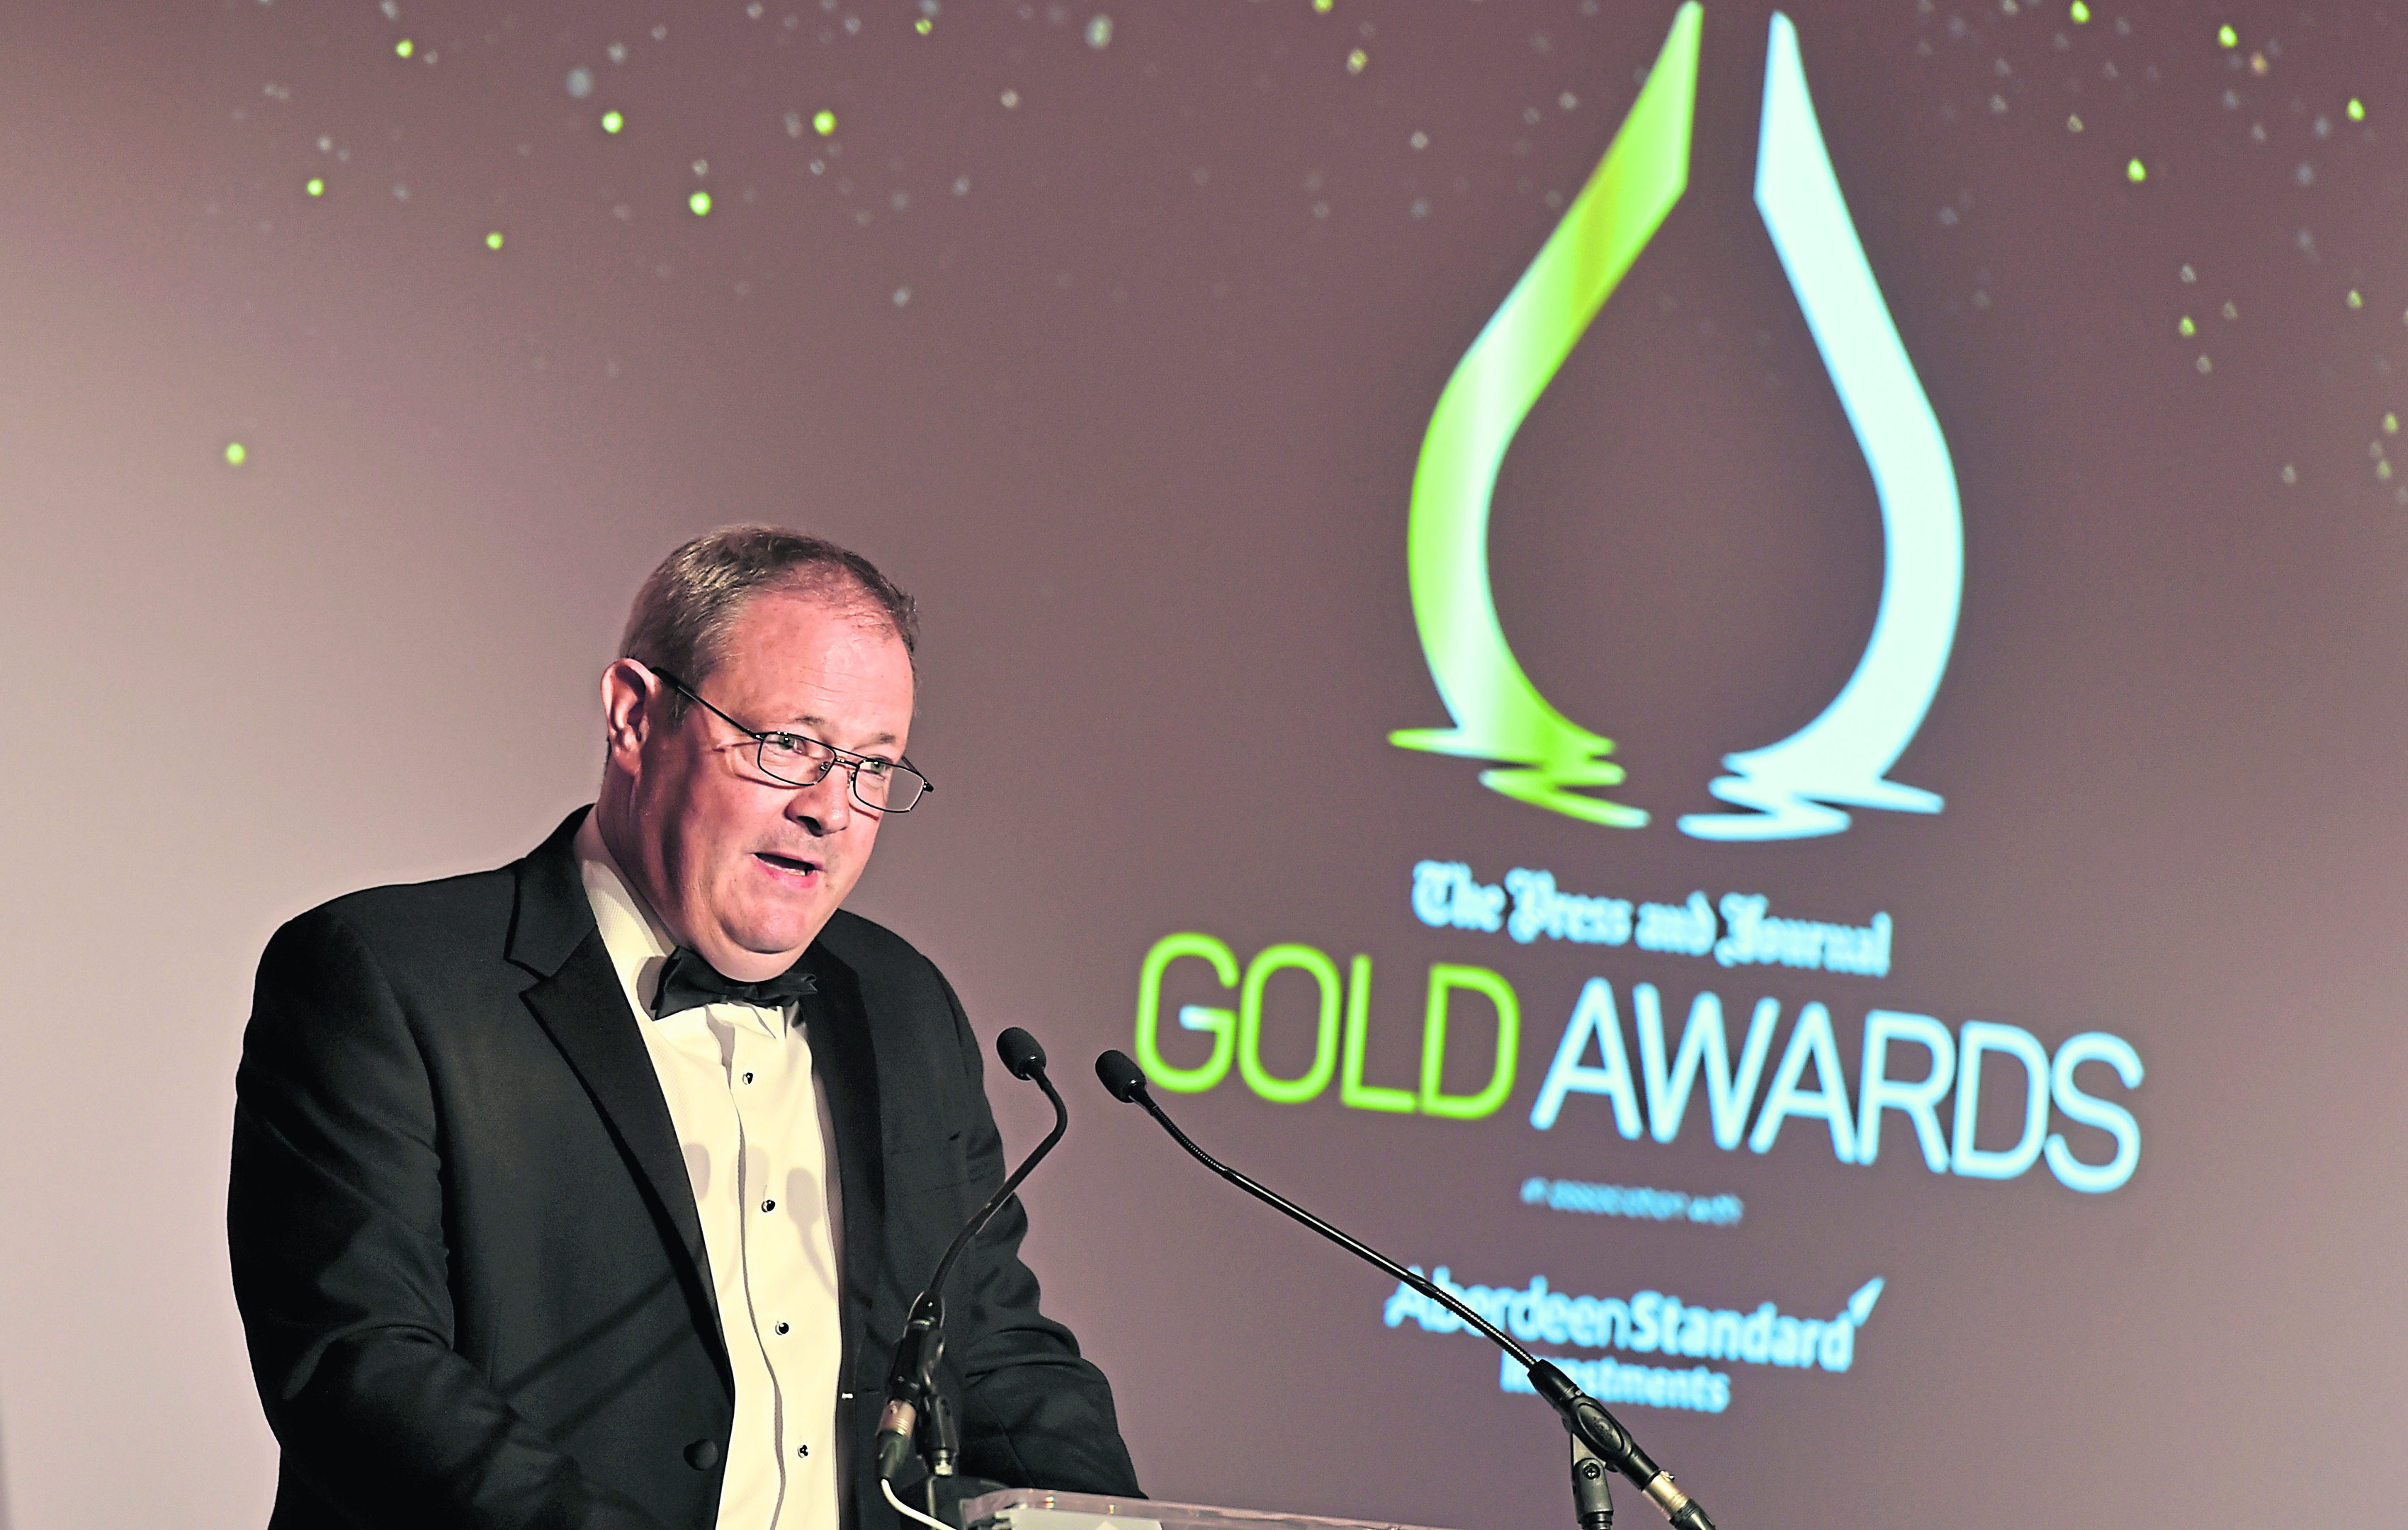 Last year's Gold awards held at the Marcliffe Hotel and Spa, Aberdeen.
Richard Neville.